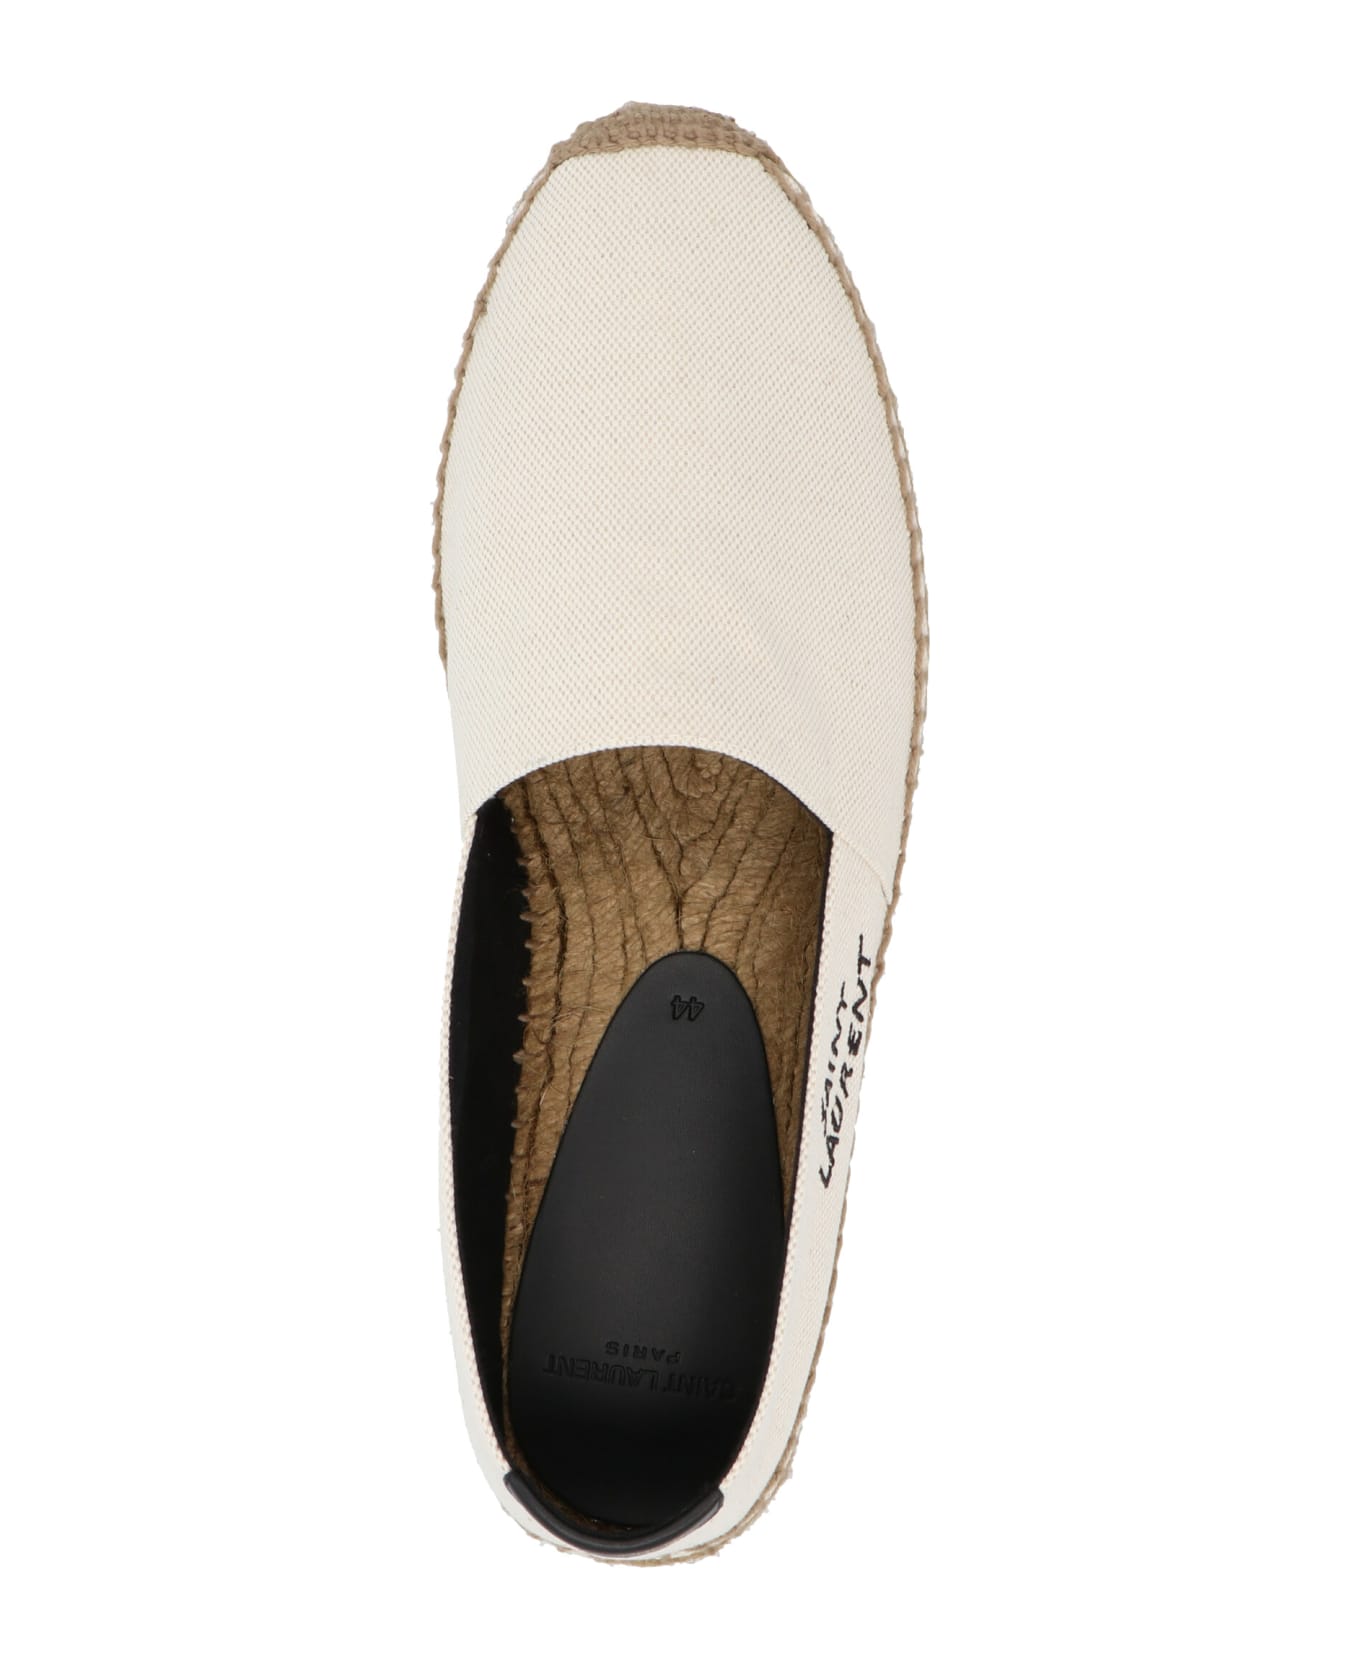 Saint Laurent Canvas Espadrilles With Embroidery - White ローファー＆デッキシューズ